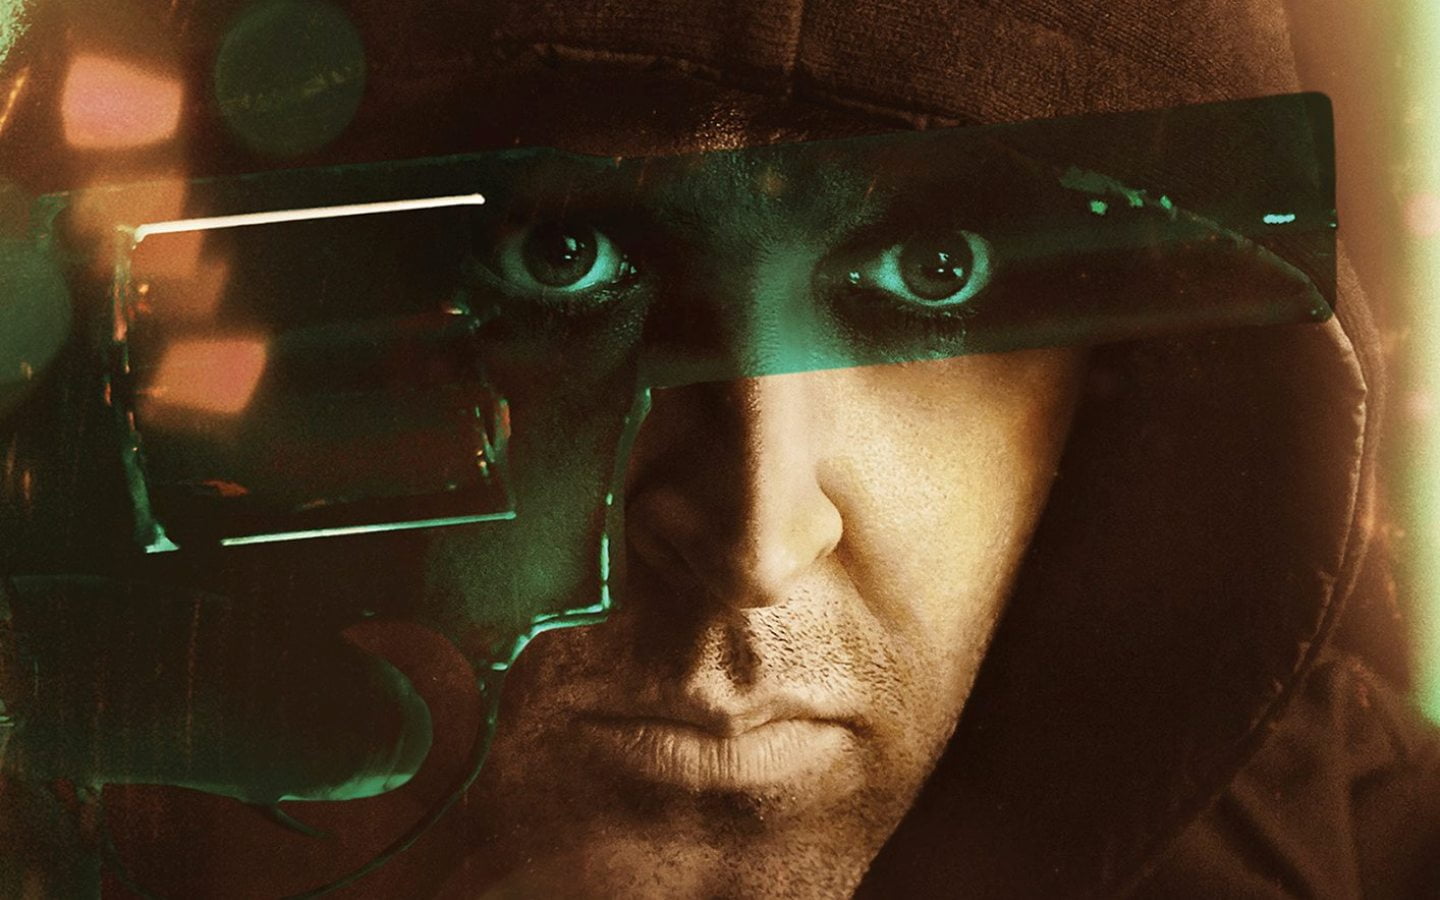 Kaabil The Mind See All, Movies, Bollywood Movies, hrithik roshan